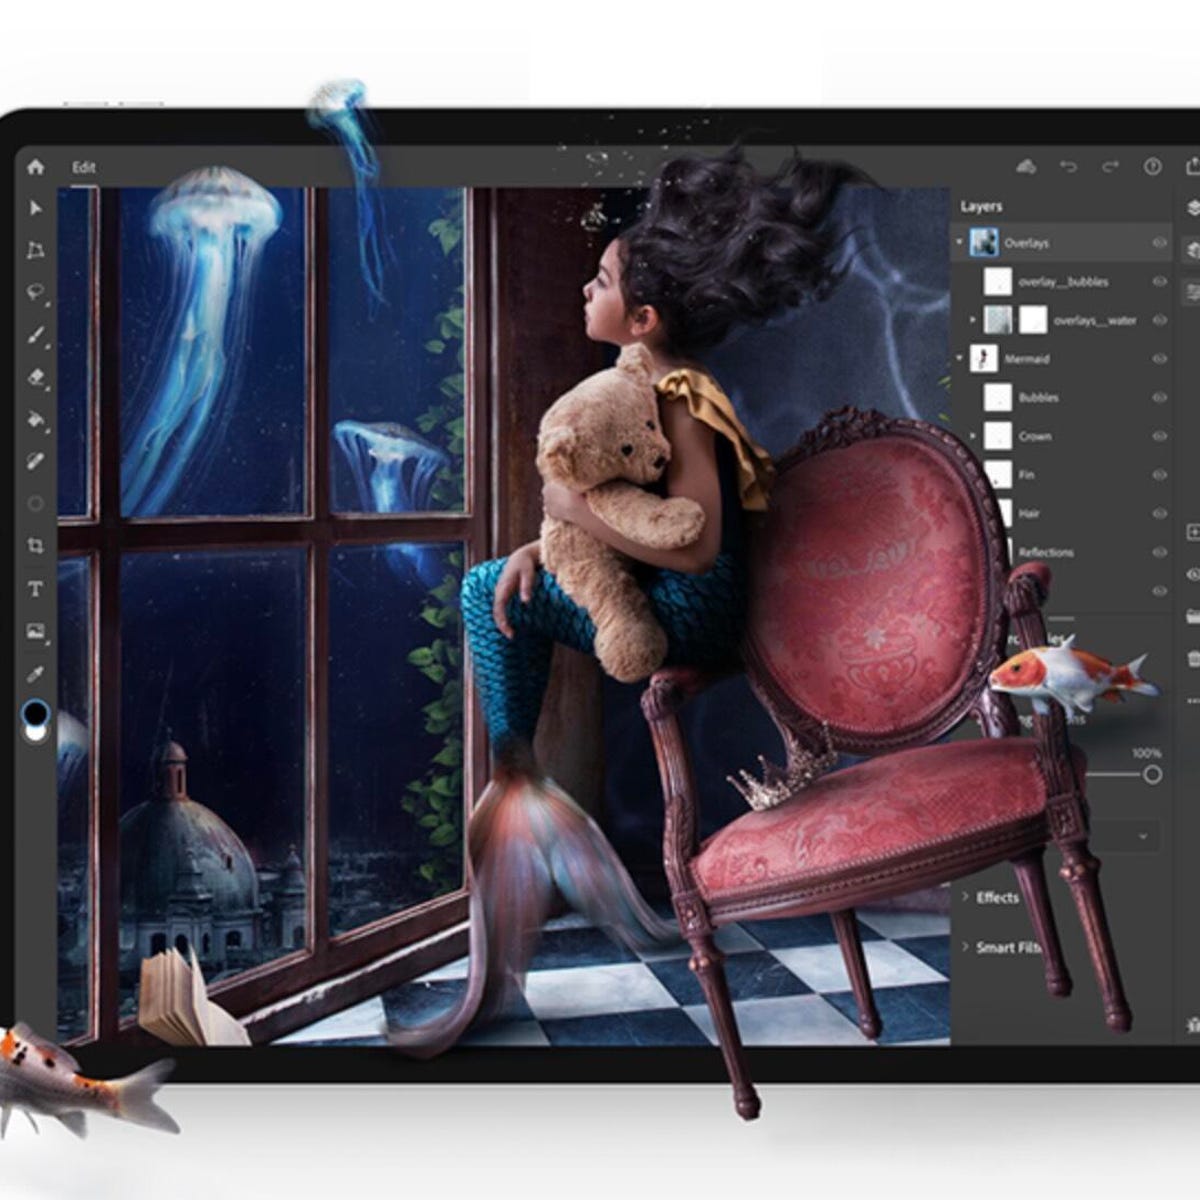 Photoshop for iPad is here, Adobe Illustrator is coming next - CNET